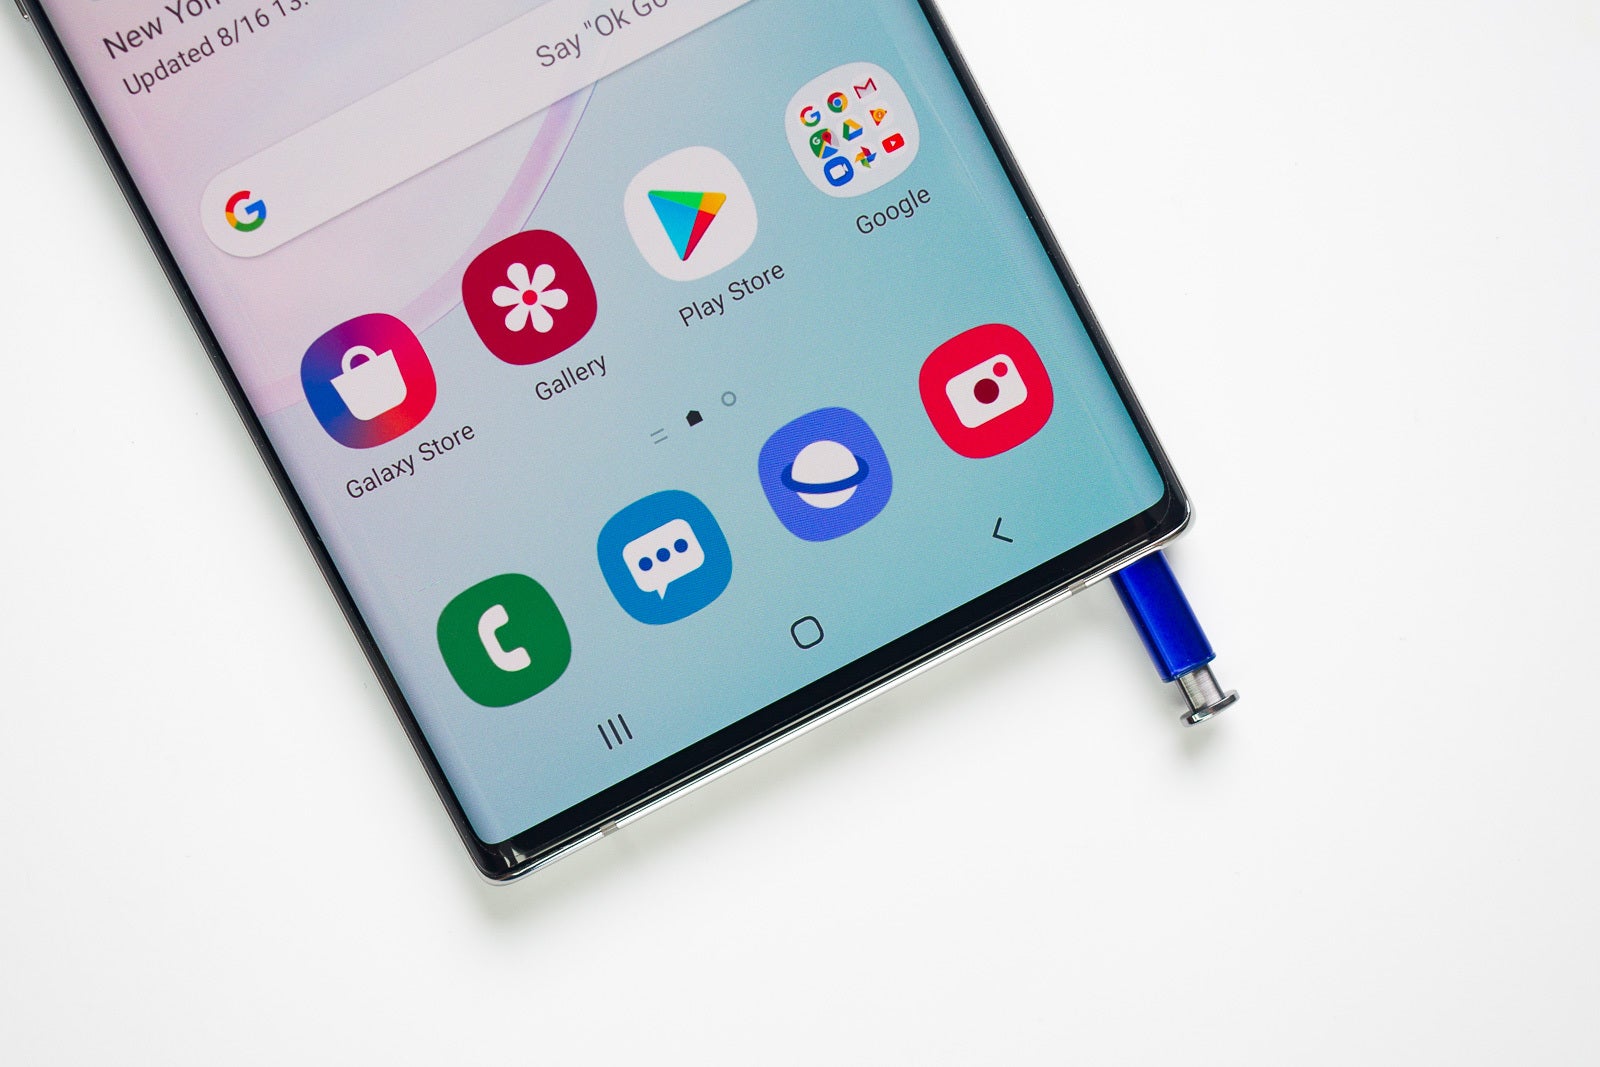 Samsung's cheaper Galaxy Note phone is coming to Europe in these colors